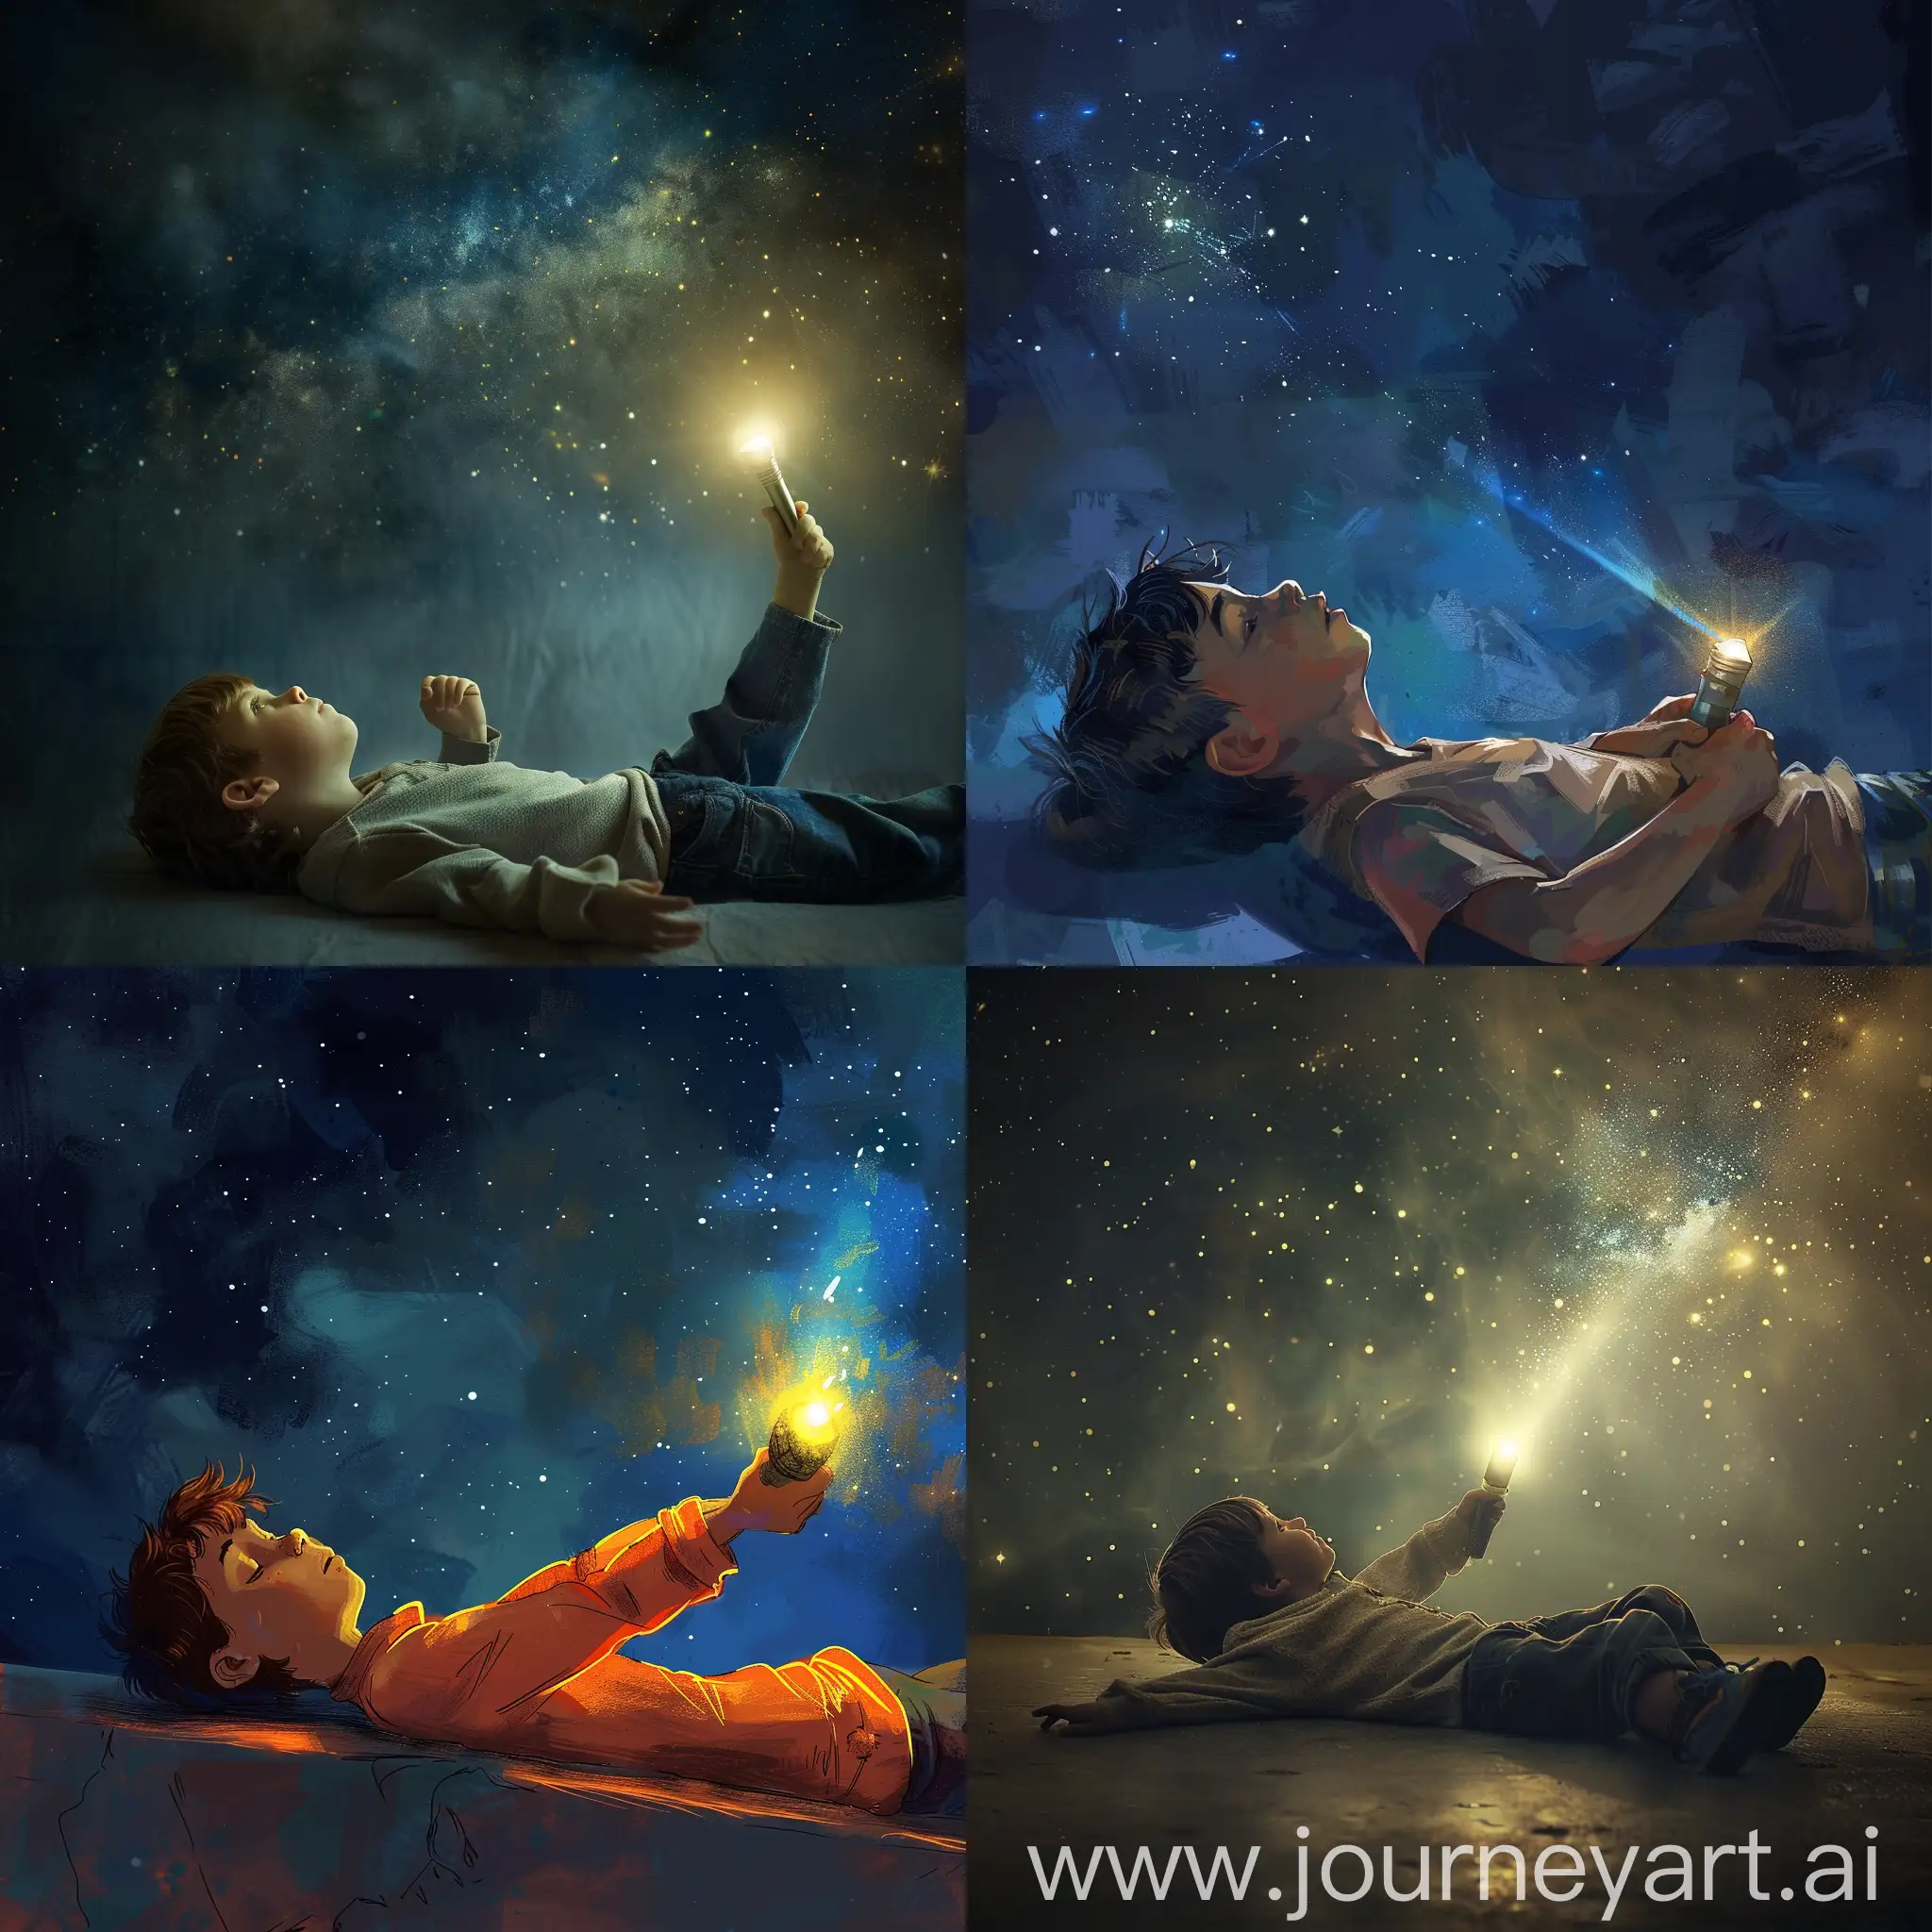 A boy who is lying on his side and his angle is towards the sky, holding a flashlight in one hand.